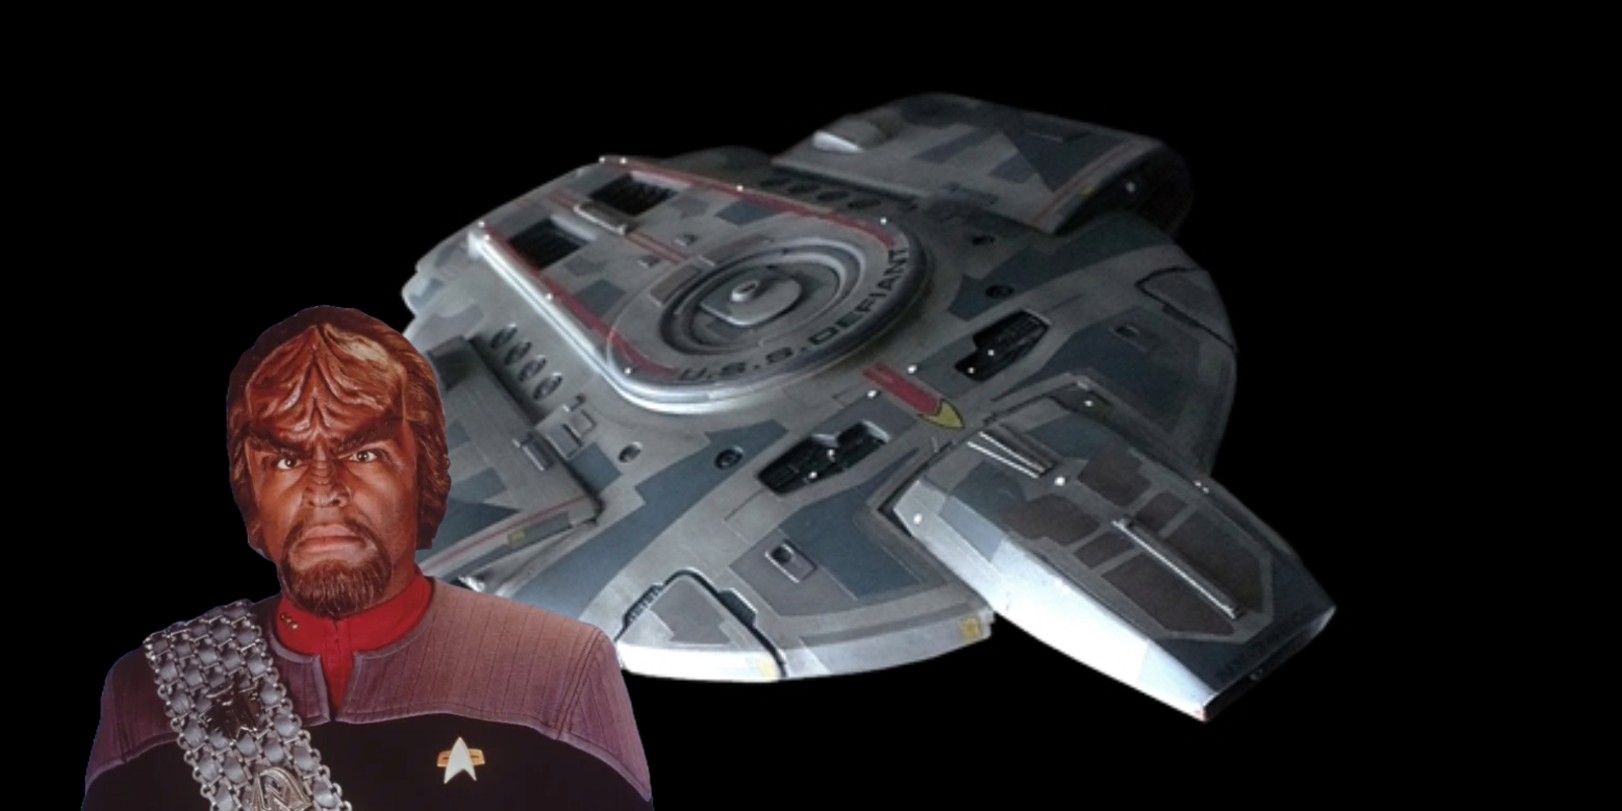 Featured Image: Worf in front of the Defiant, from Star Trek